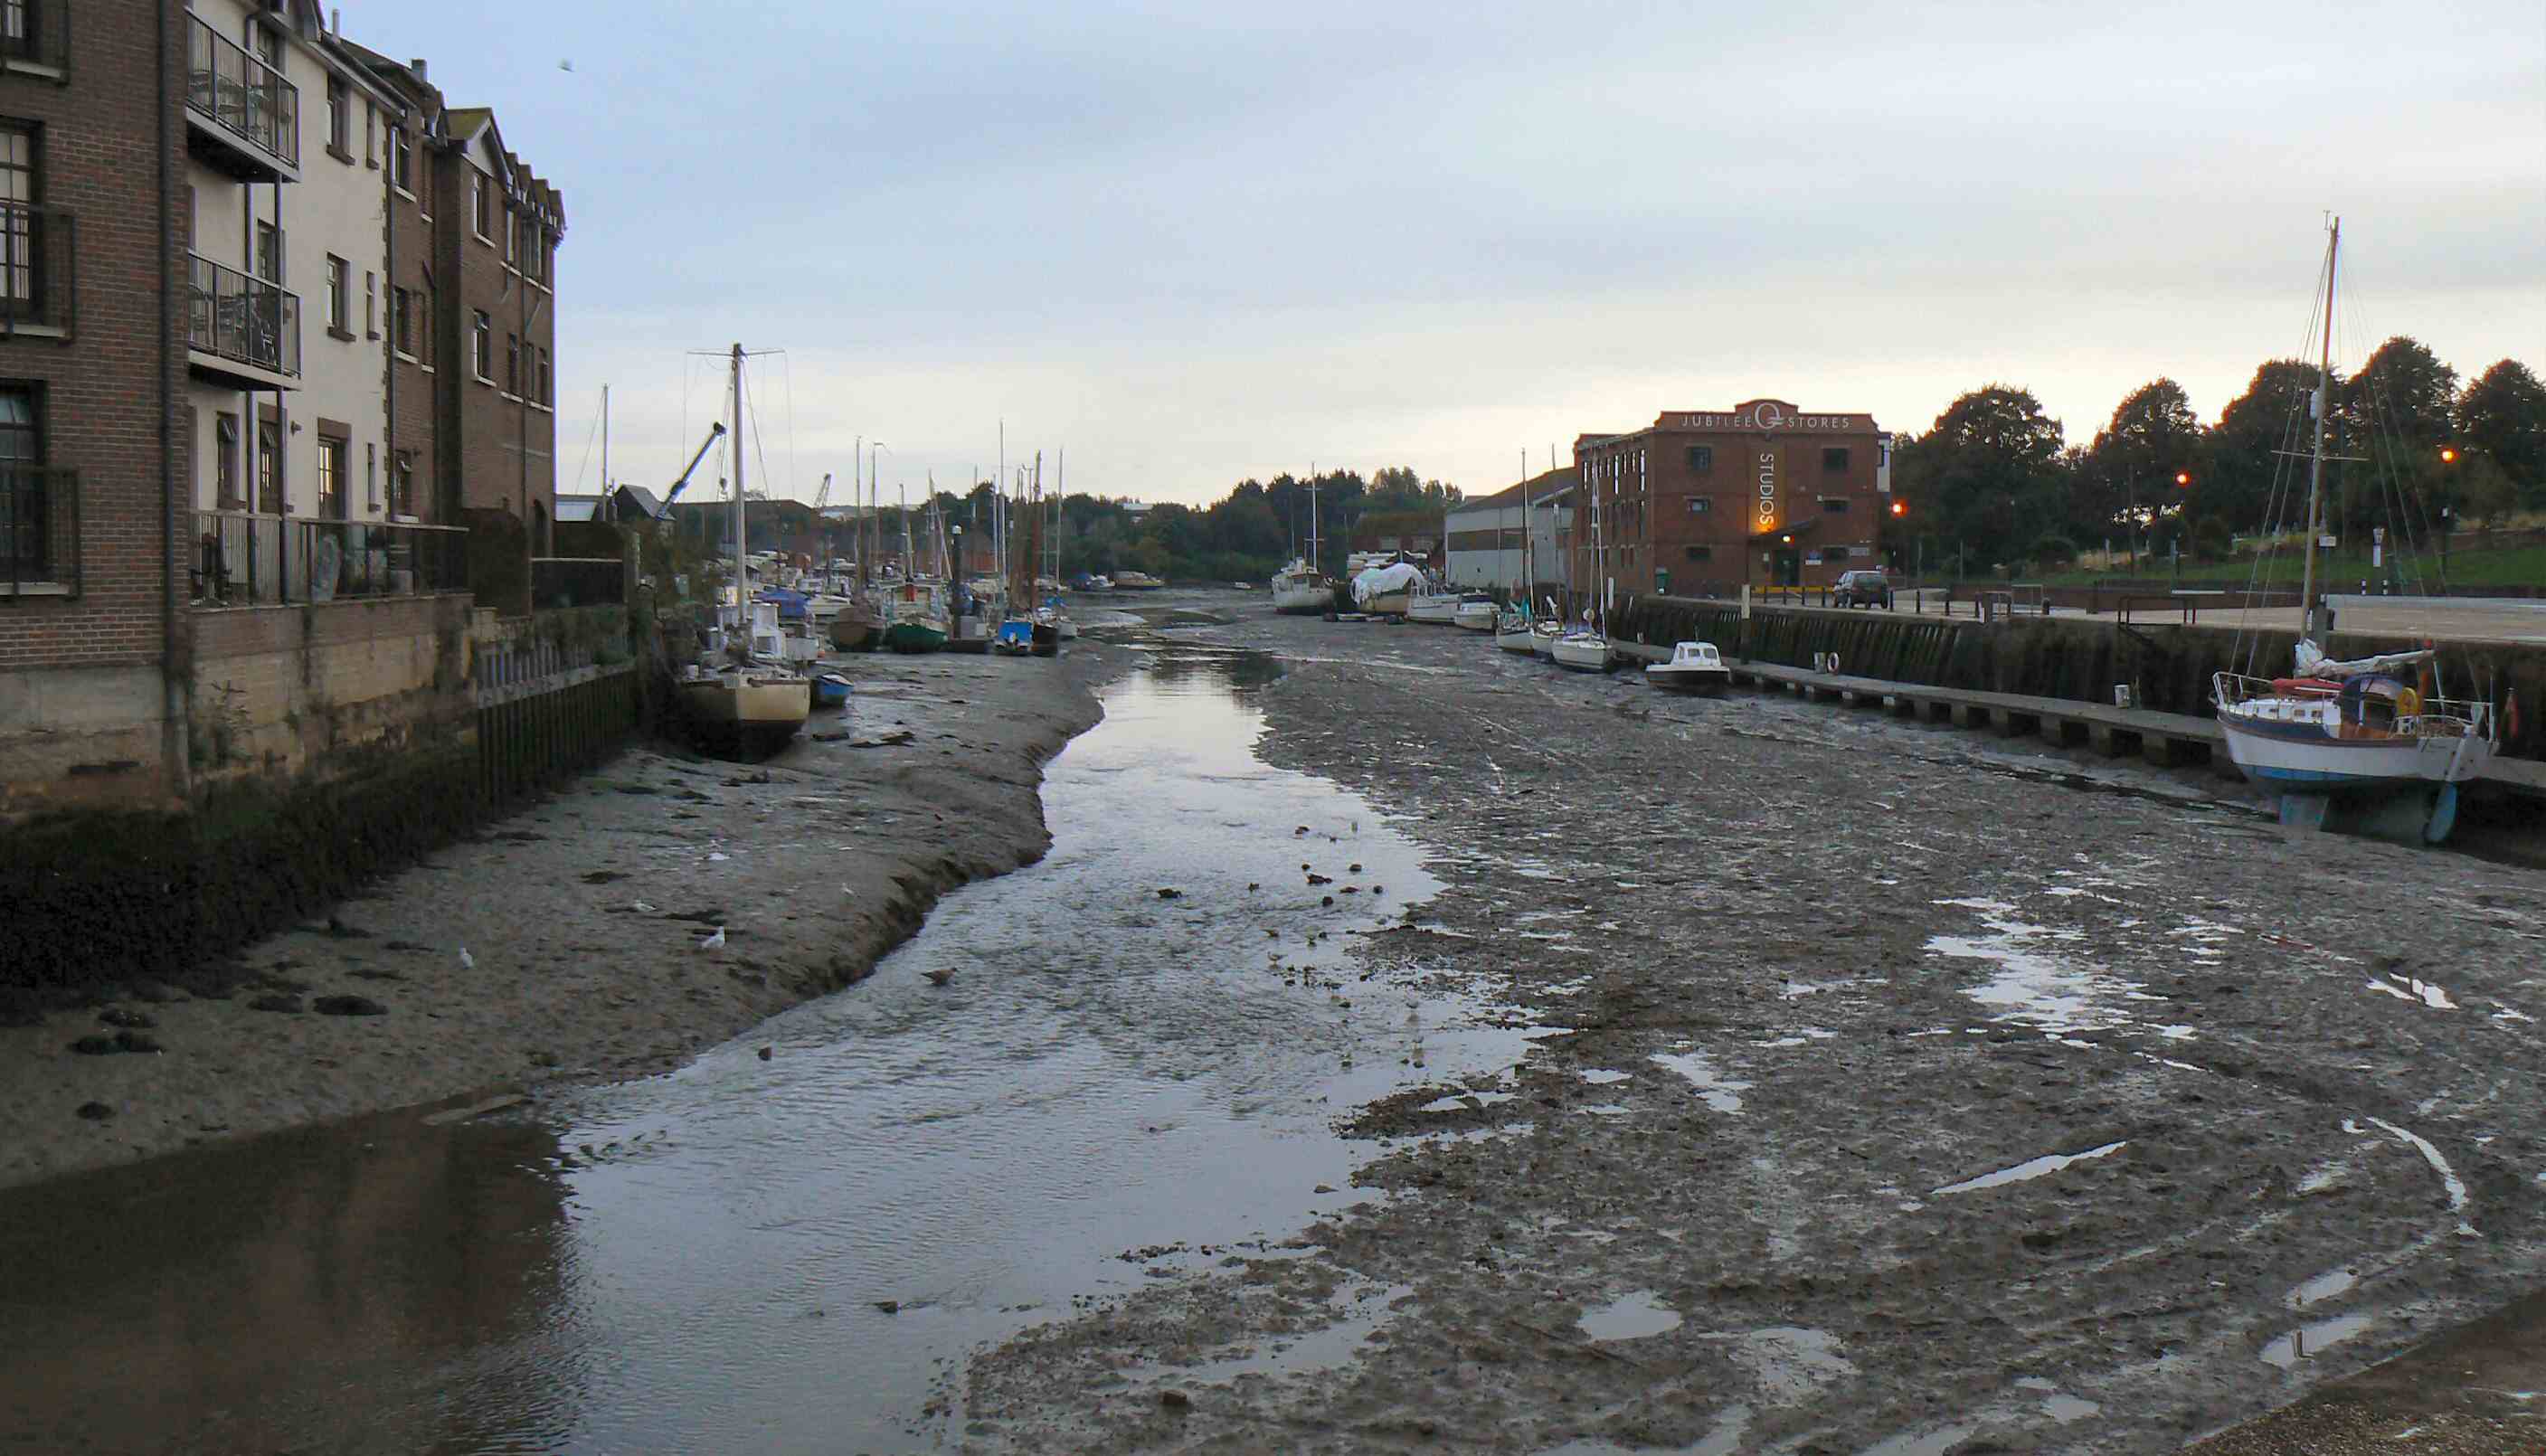 The channel within Newport Harbour